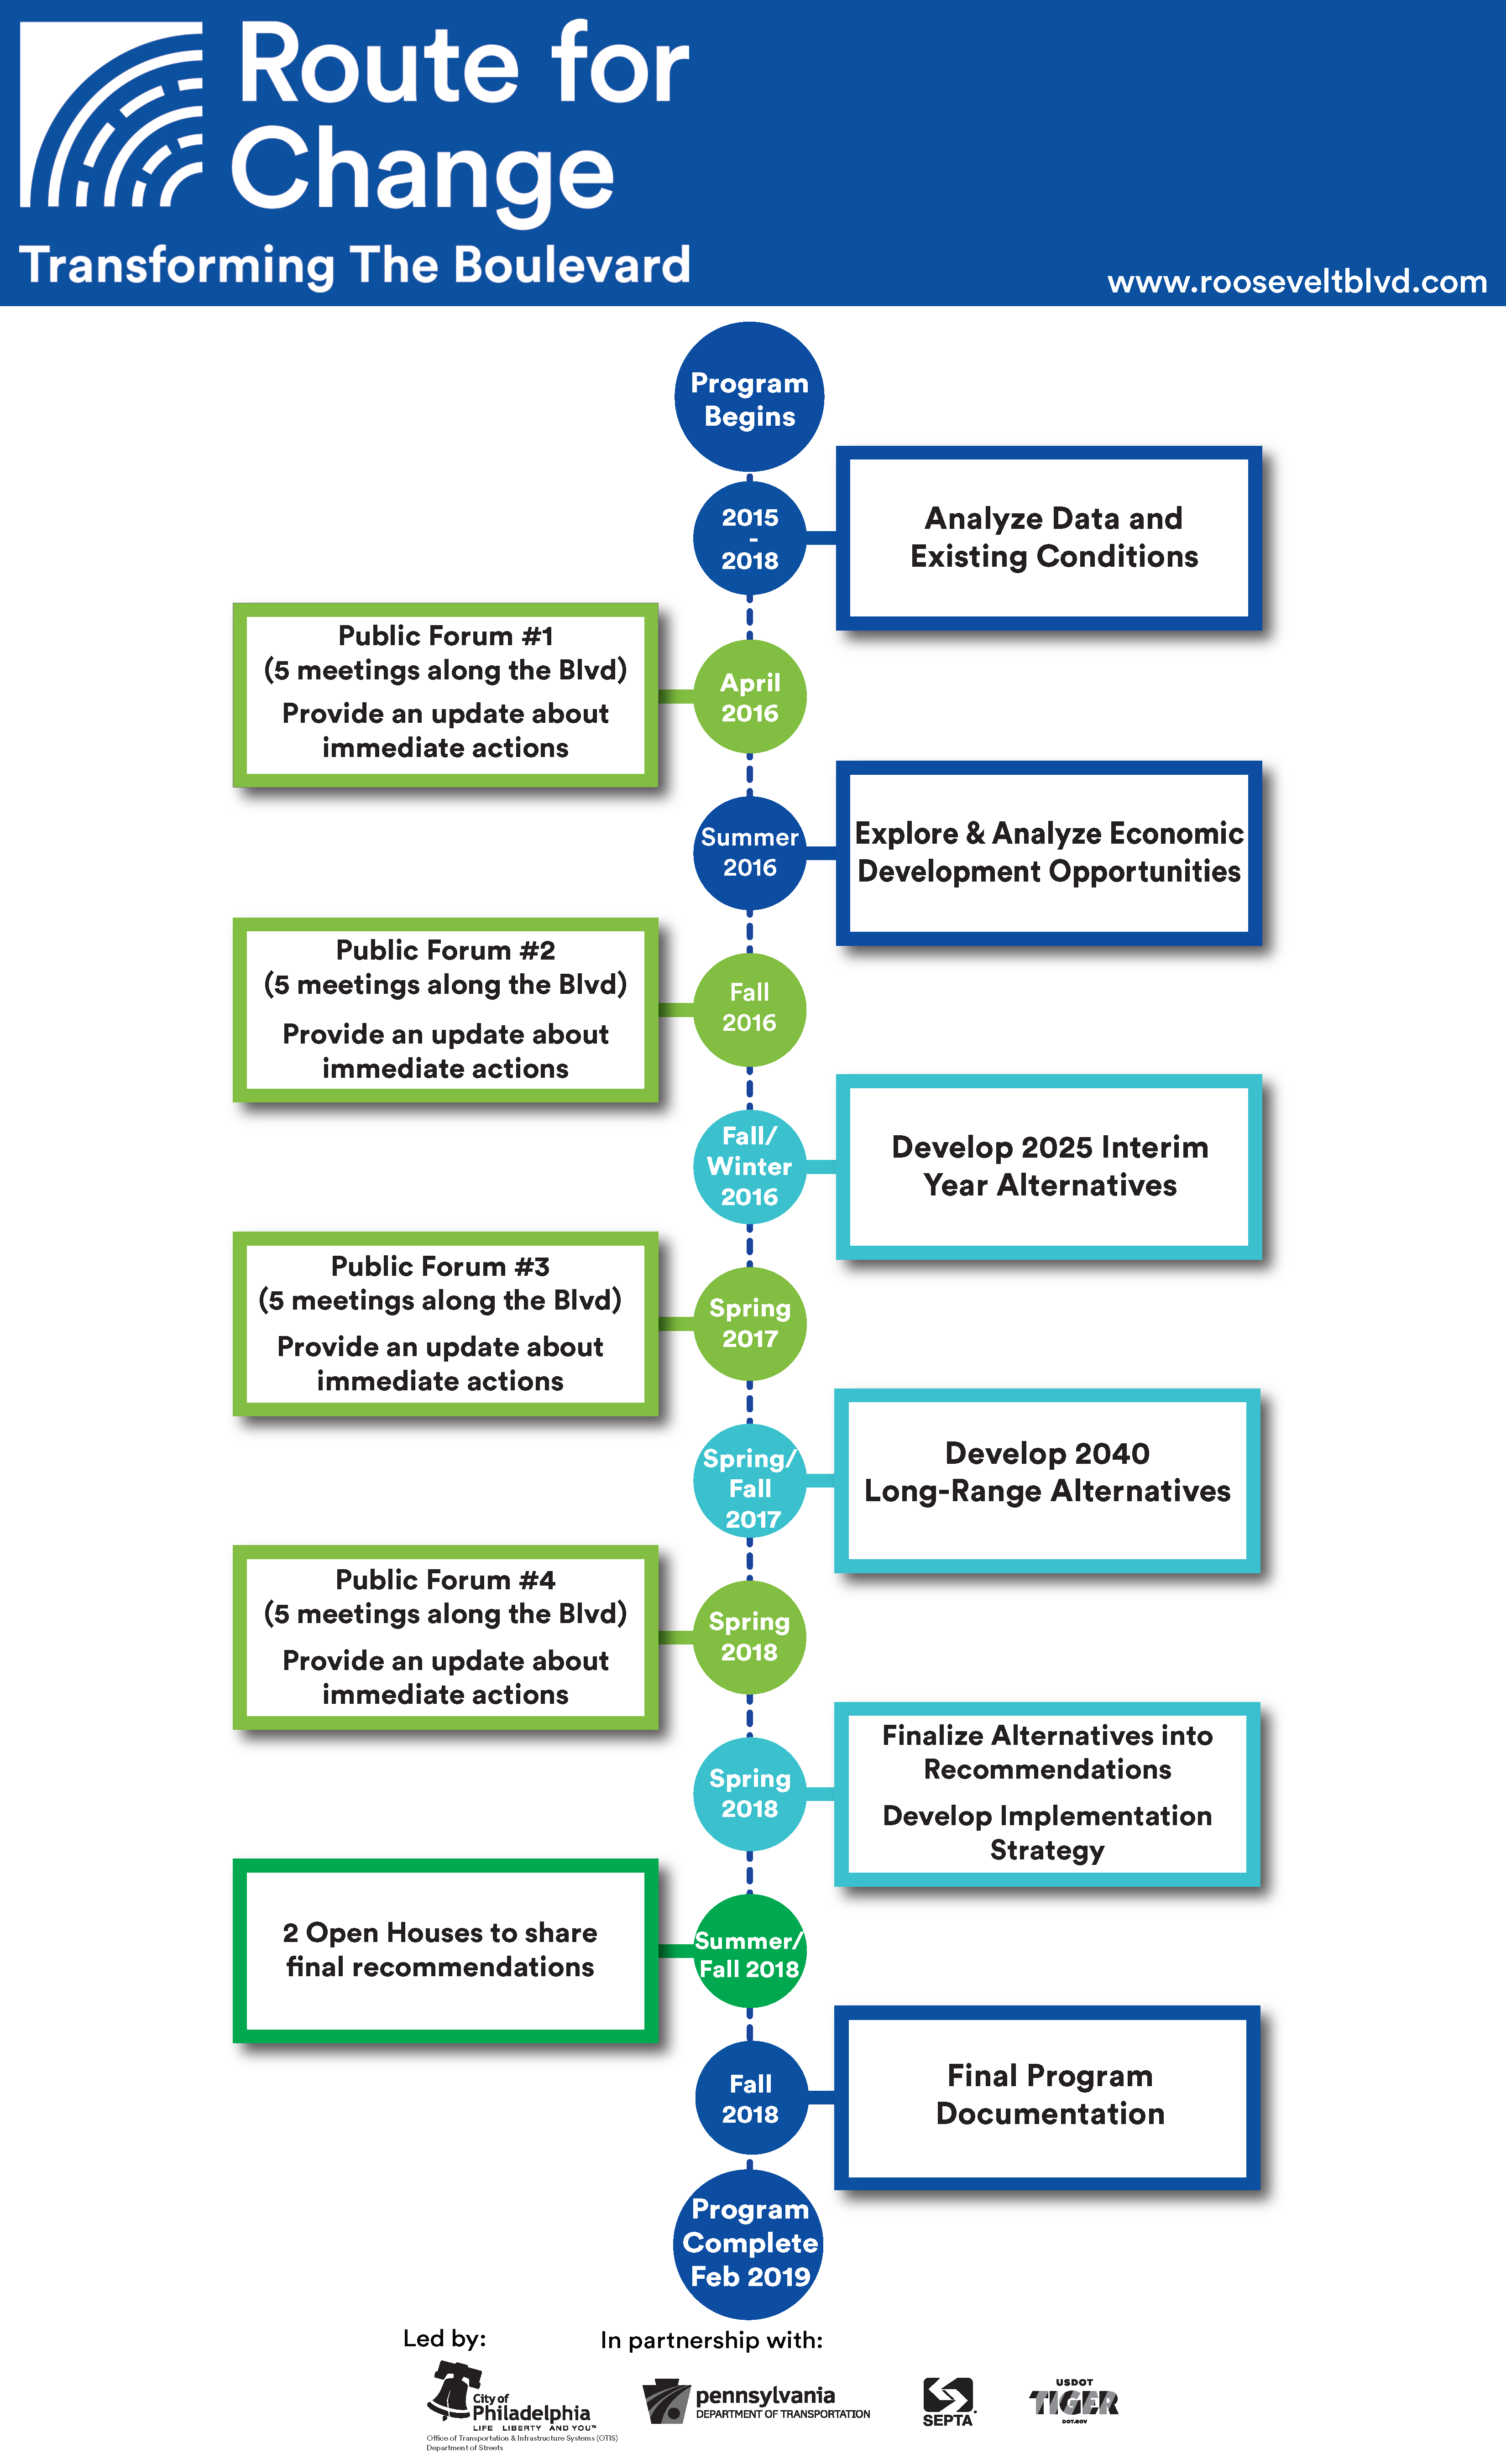 Timeline for Route for Change planning process